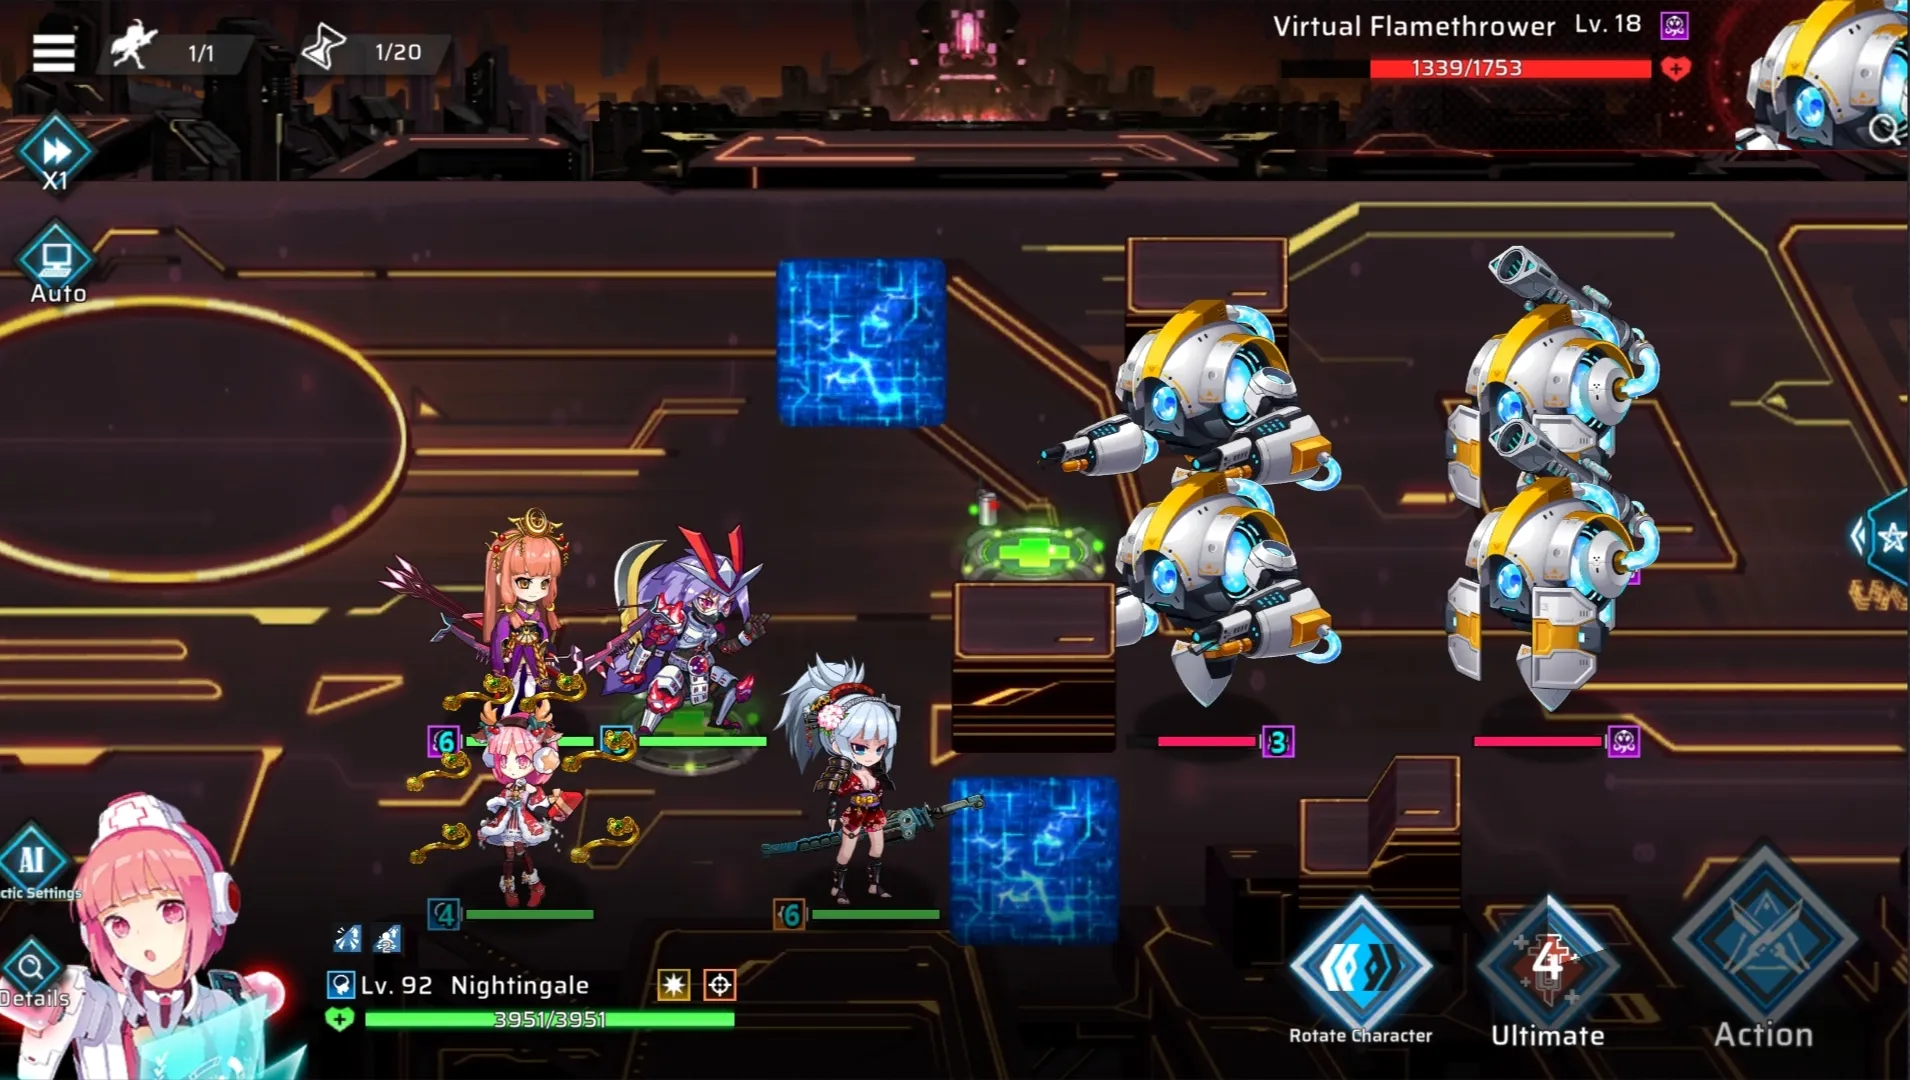 This picture shows the Battle Interface of WonderHero. Players form a team of heroes to fight against robots and mutated pests roaming in the wild.